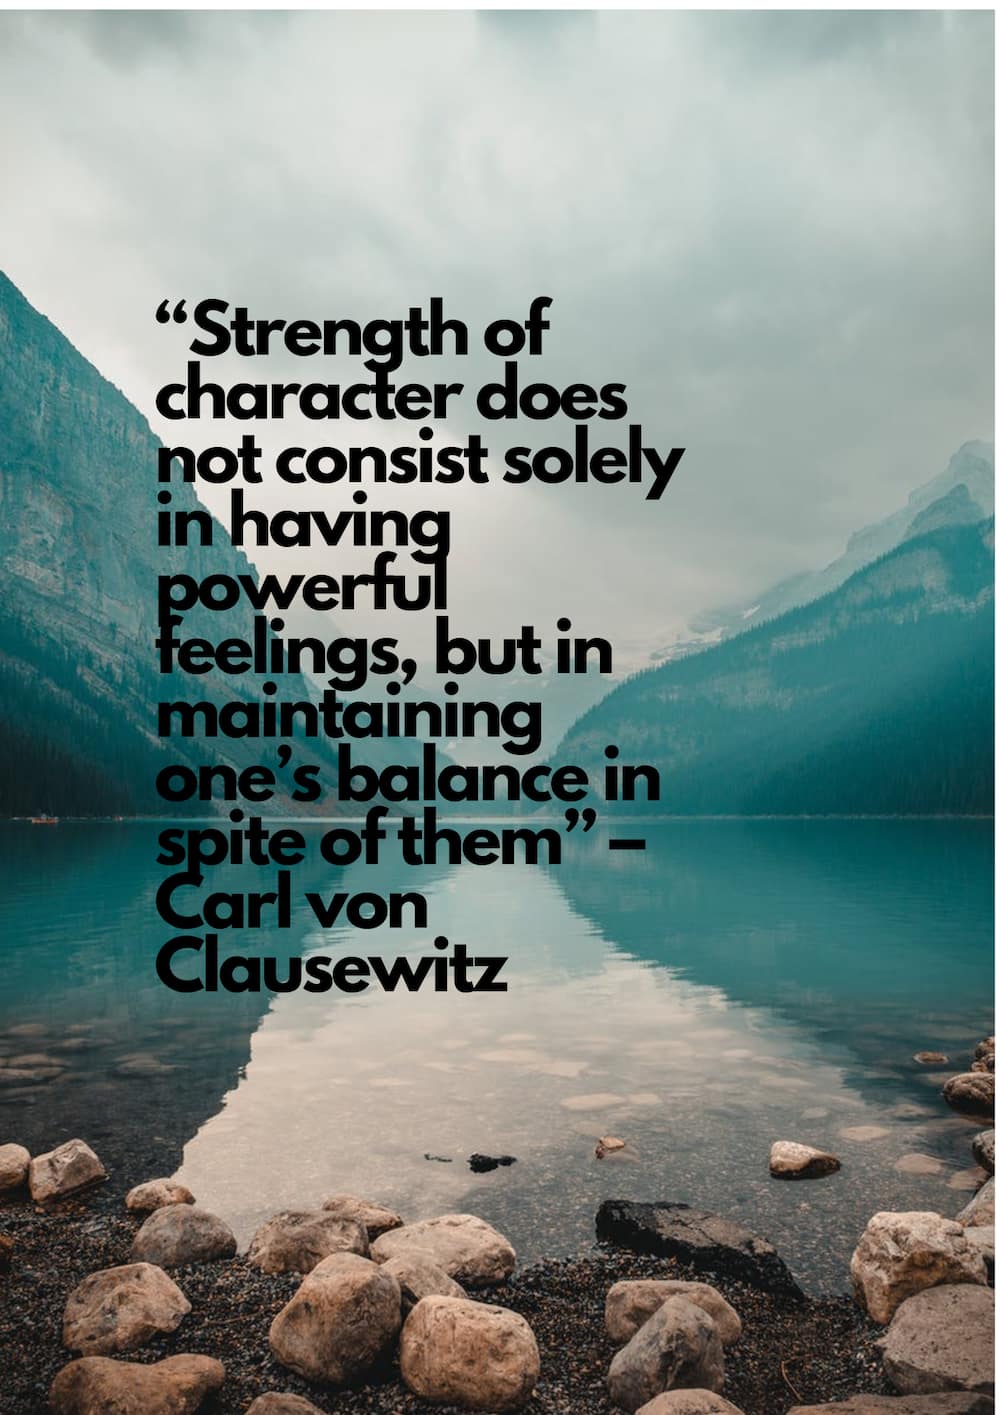 Quotes on character and reputation